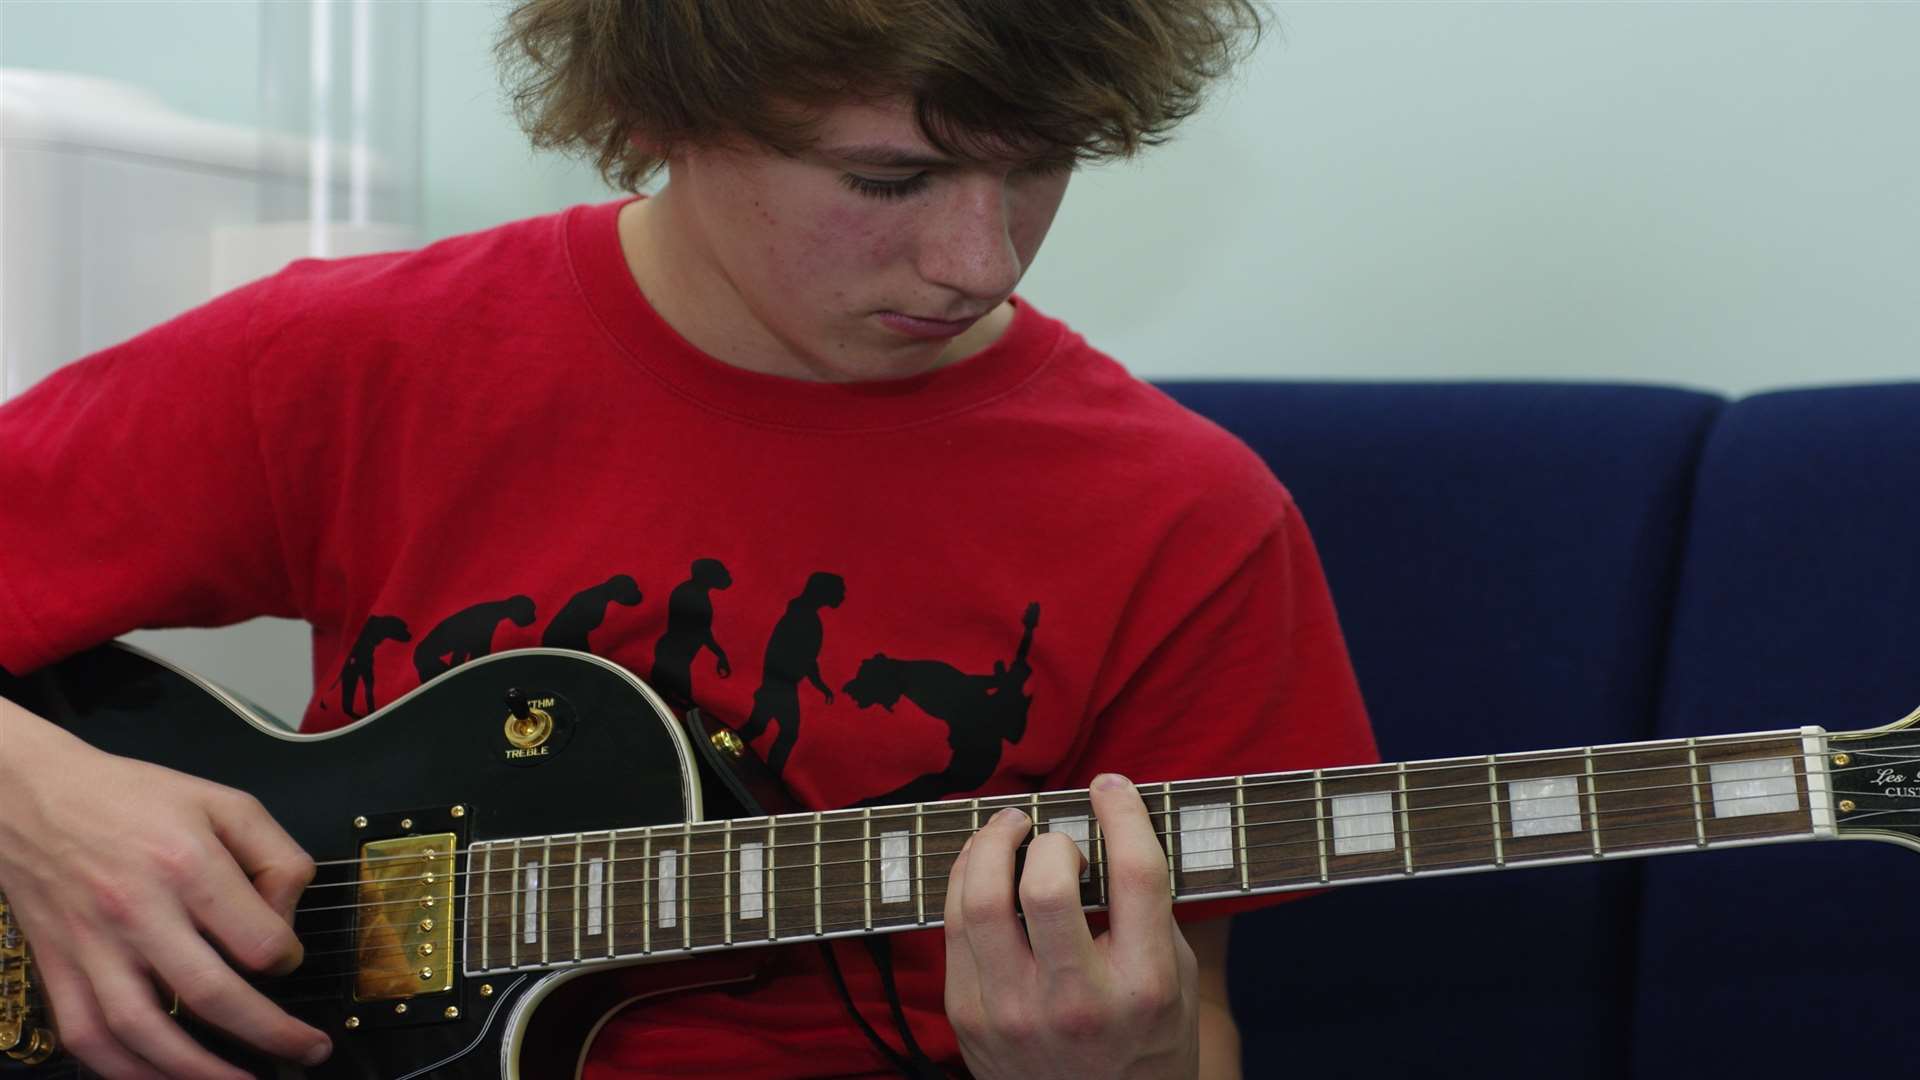 Rock School is designed for budding and enthusiastic musicians